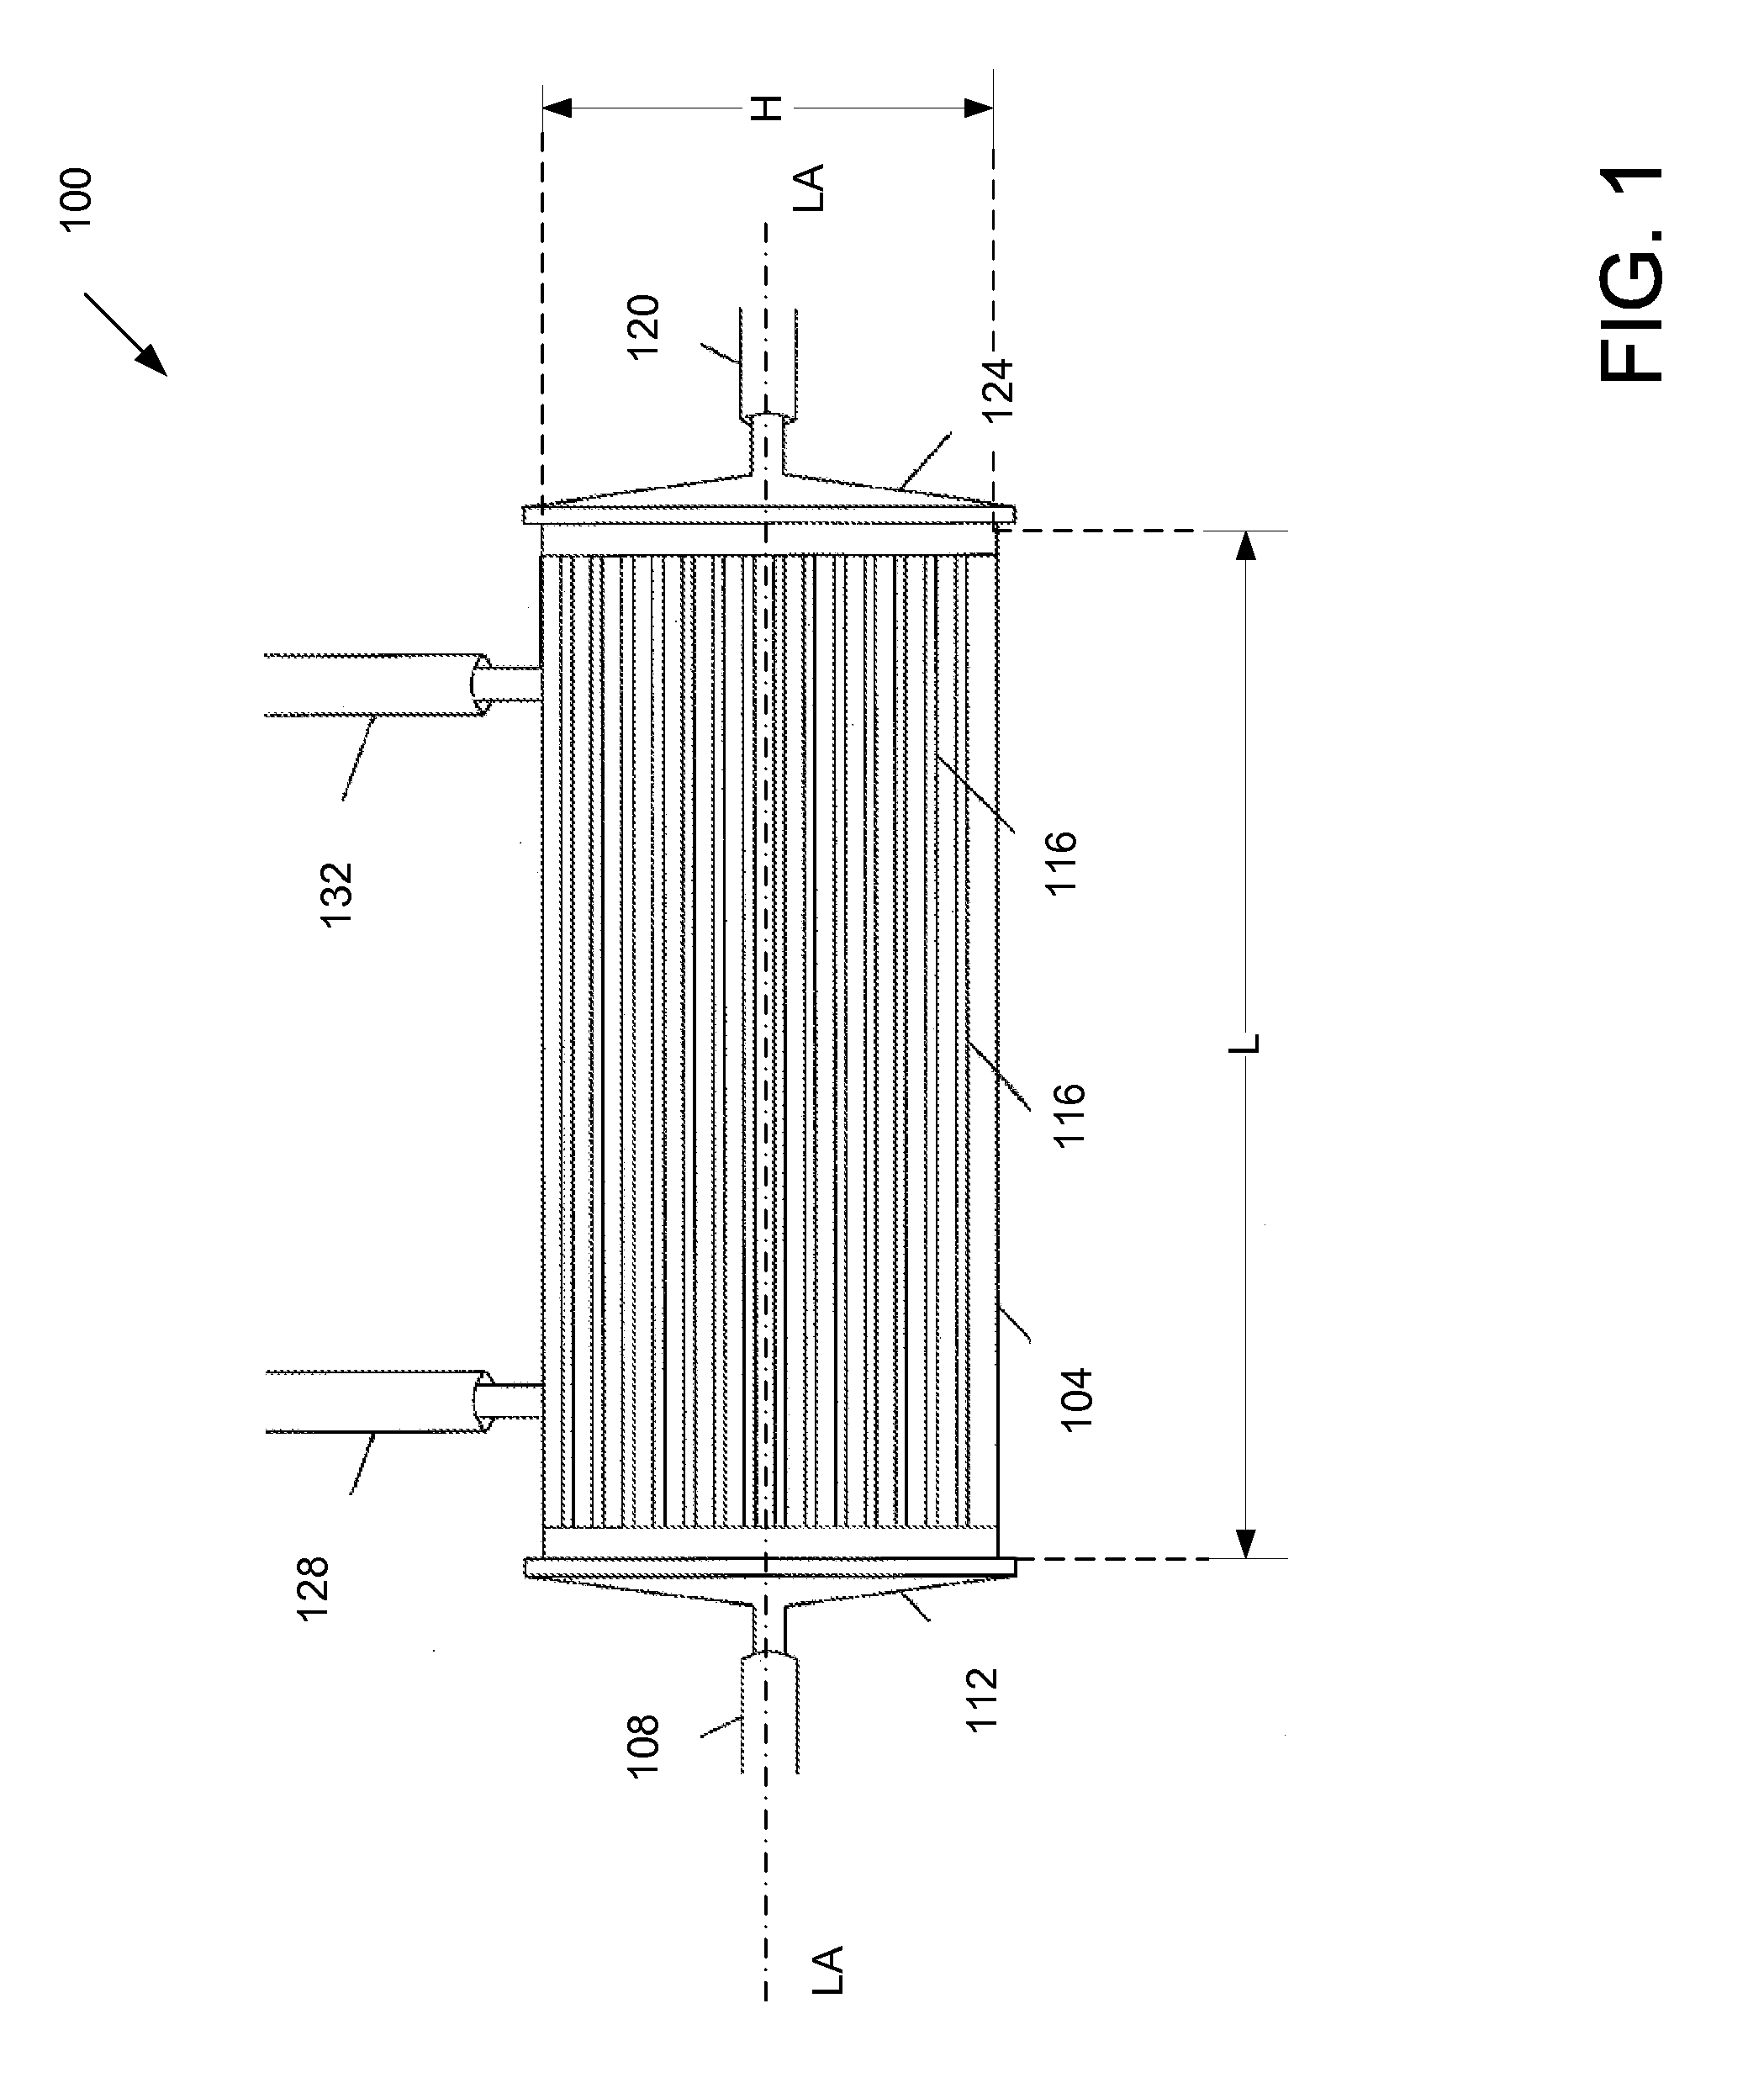 Method of loading and distributing cells in a bioreactor of a cell expansion system